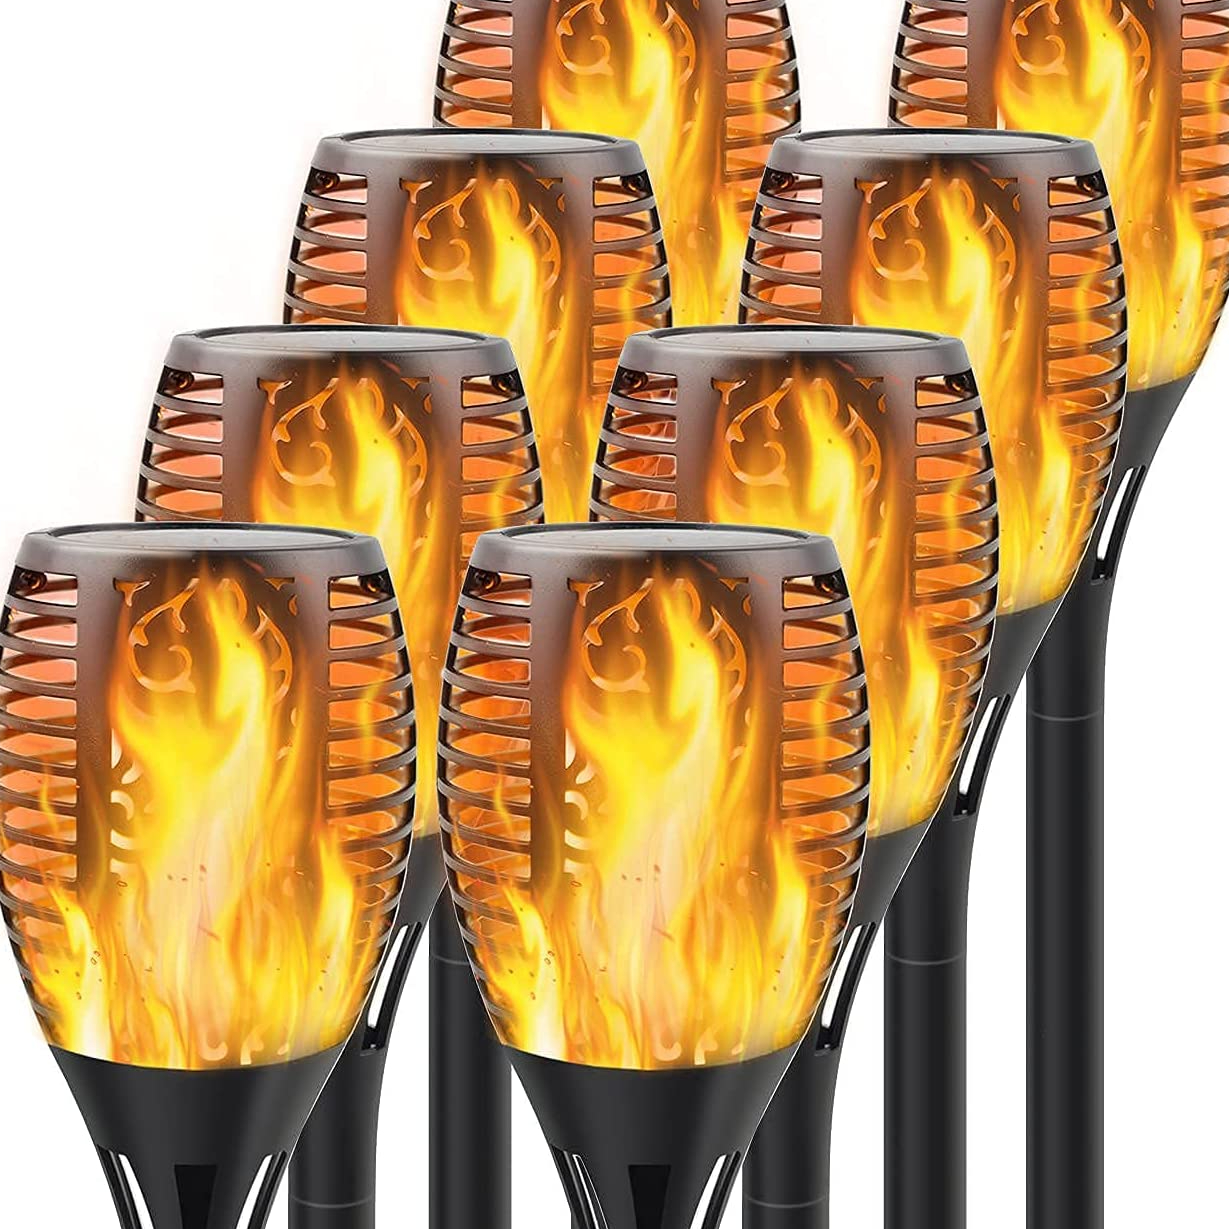 Permande Solar Torch Lights with Flickering Flame, Fire Effect Garden Light, Auto On/Off Dust to Dawn, Outdoor Waterproof Landscape Decoration, Solar Powered Security Torch Light for Patio, 8 Pack